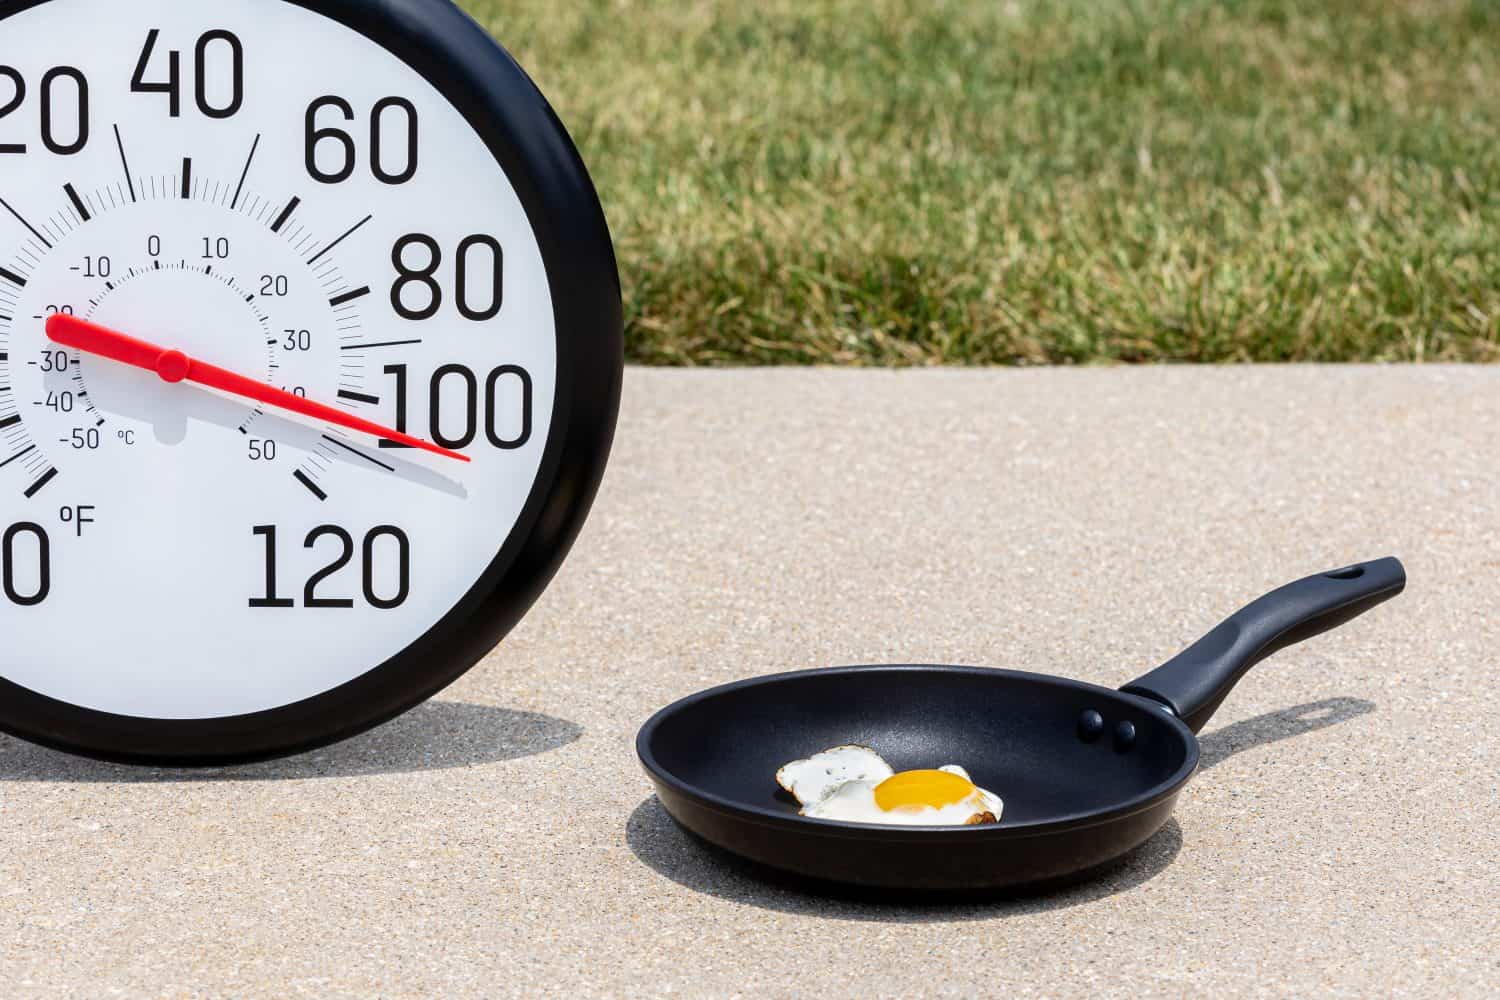 Cooking egg on sidewalk with thermometer in the sun during heatwave. Hot weather, high temperature and heat warning concept.